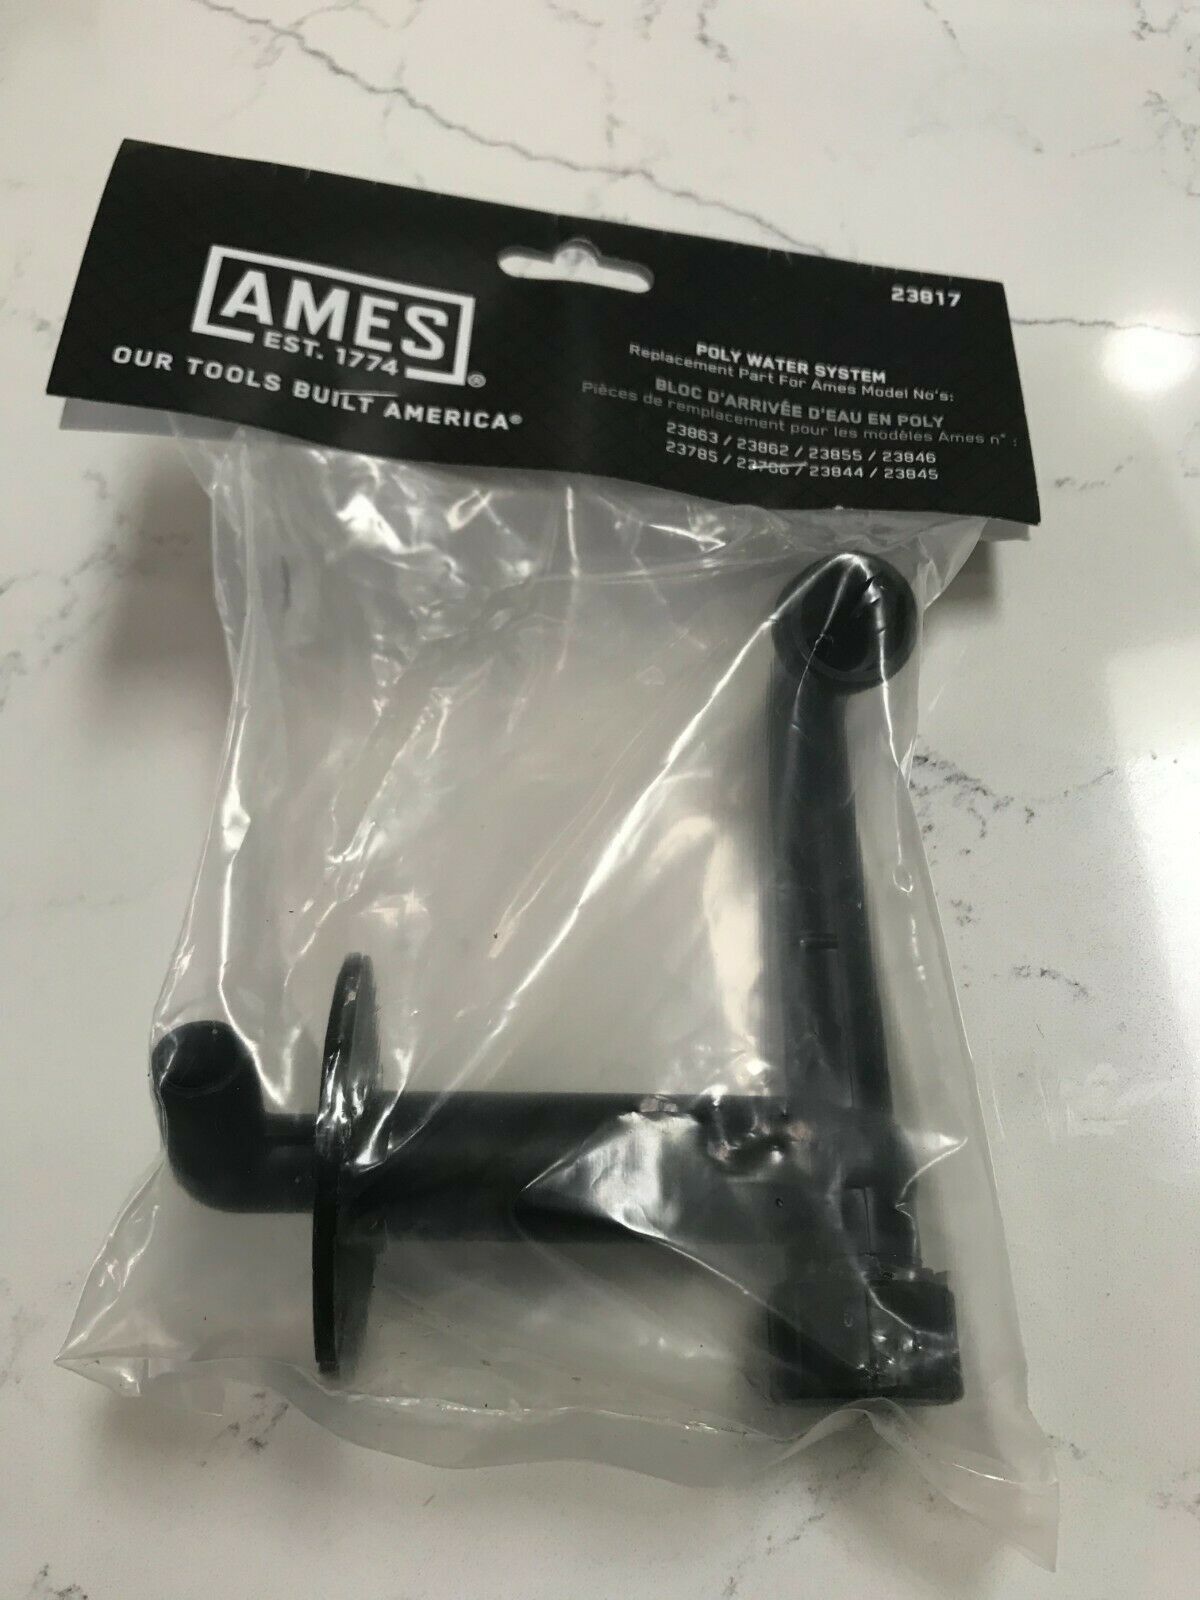 Genuine Ames Reel Easy Water Hose Connect Intake Assembly O-Rings